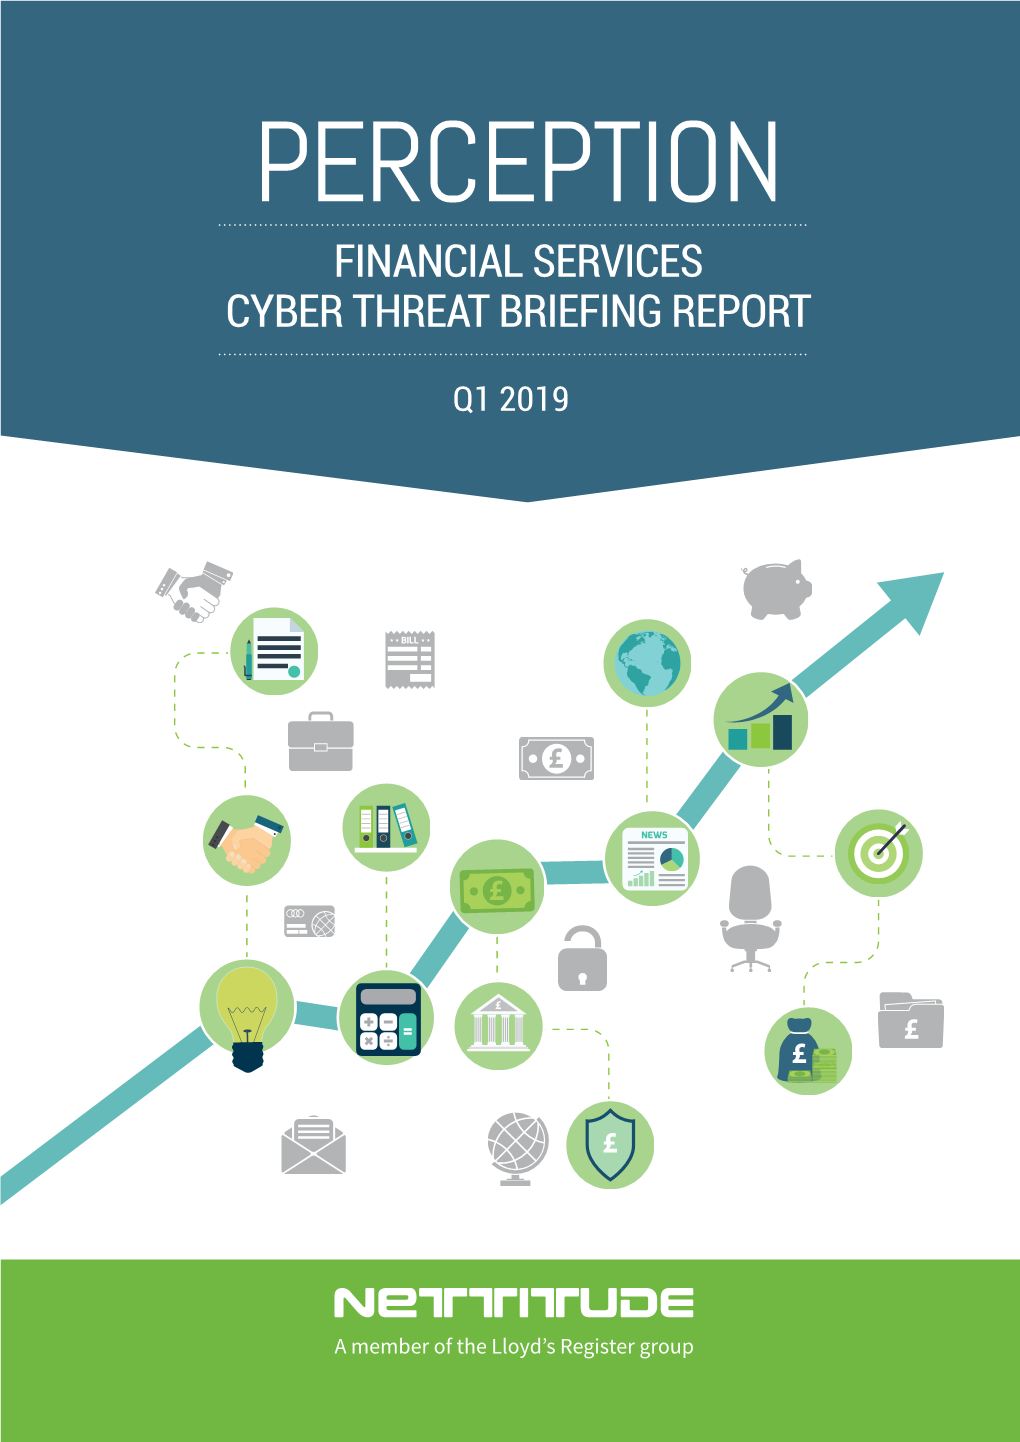 Perception Financial Services Cyber Threat Briefing Report